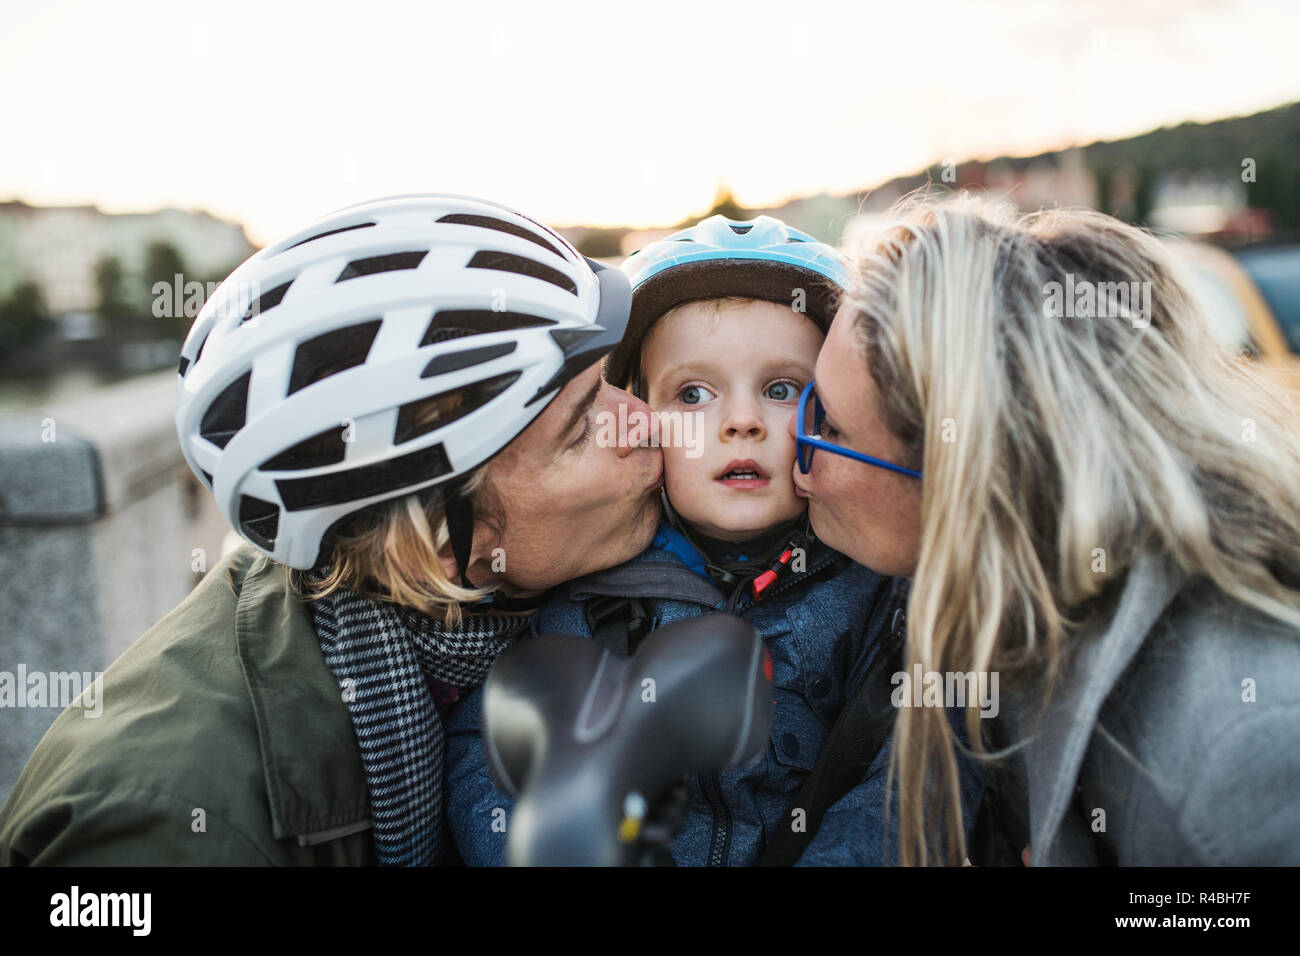 A small toddler boy with helmet and young parents outdoors in city, kissing. Stock Photo